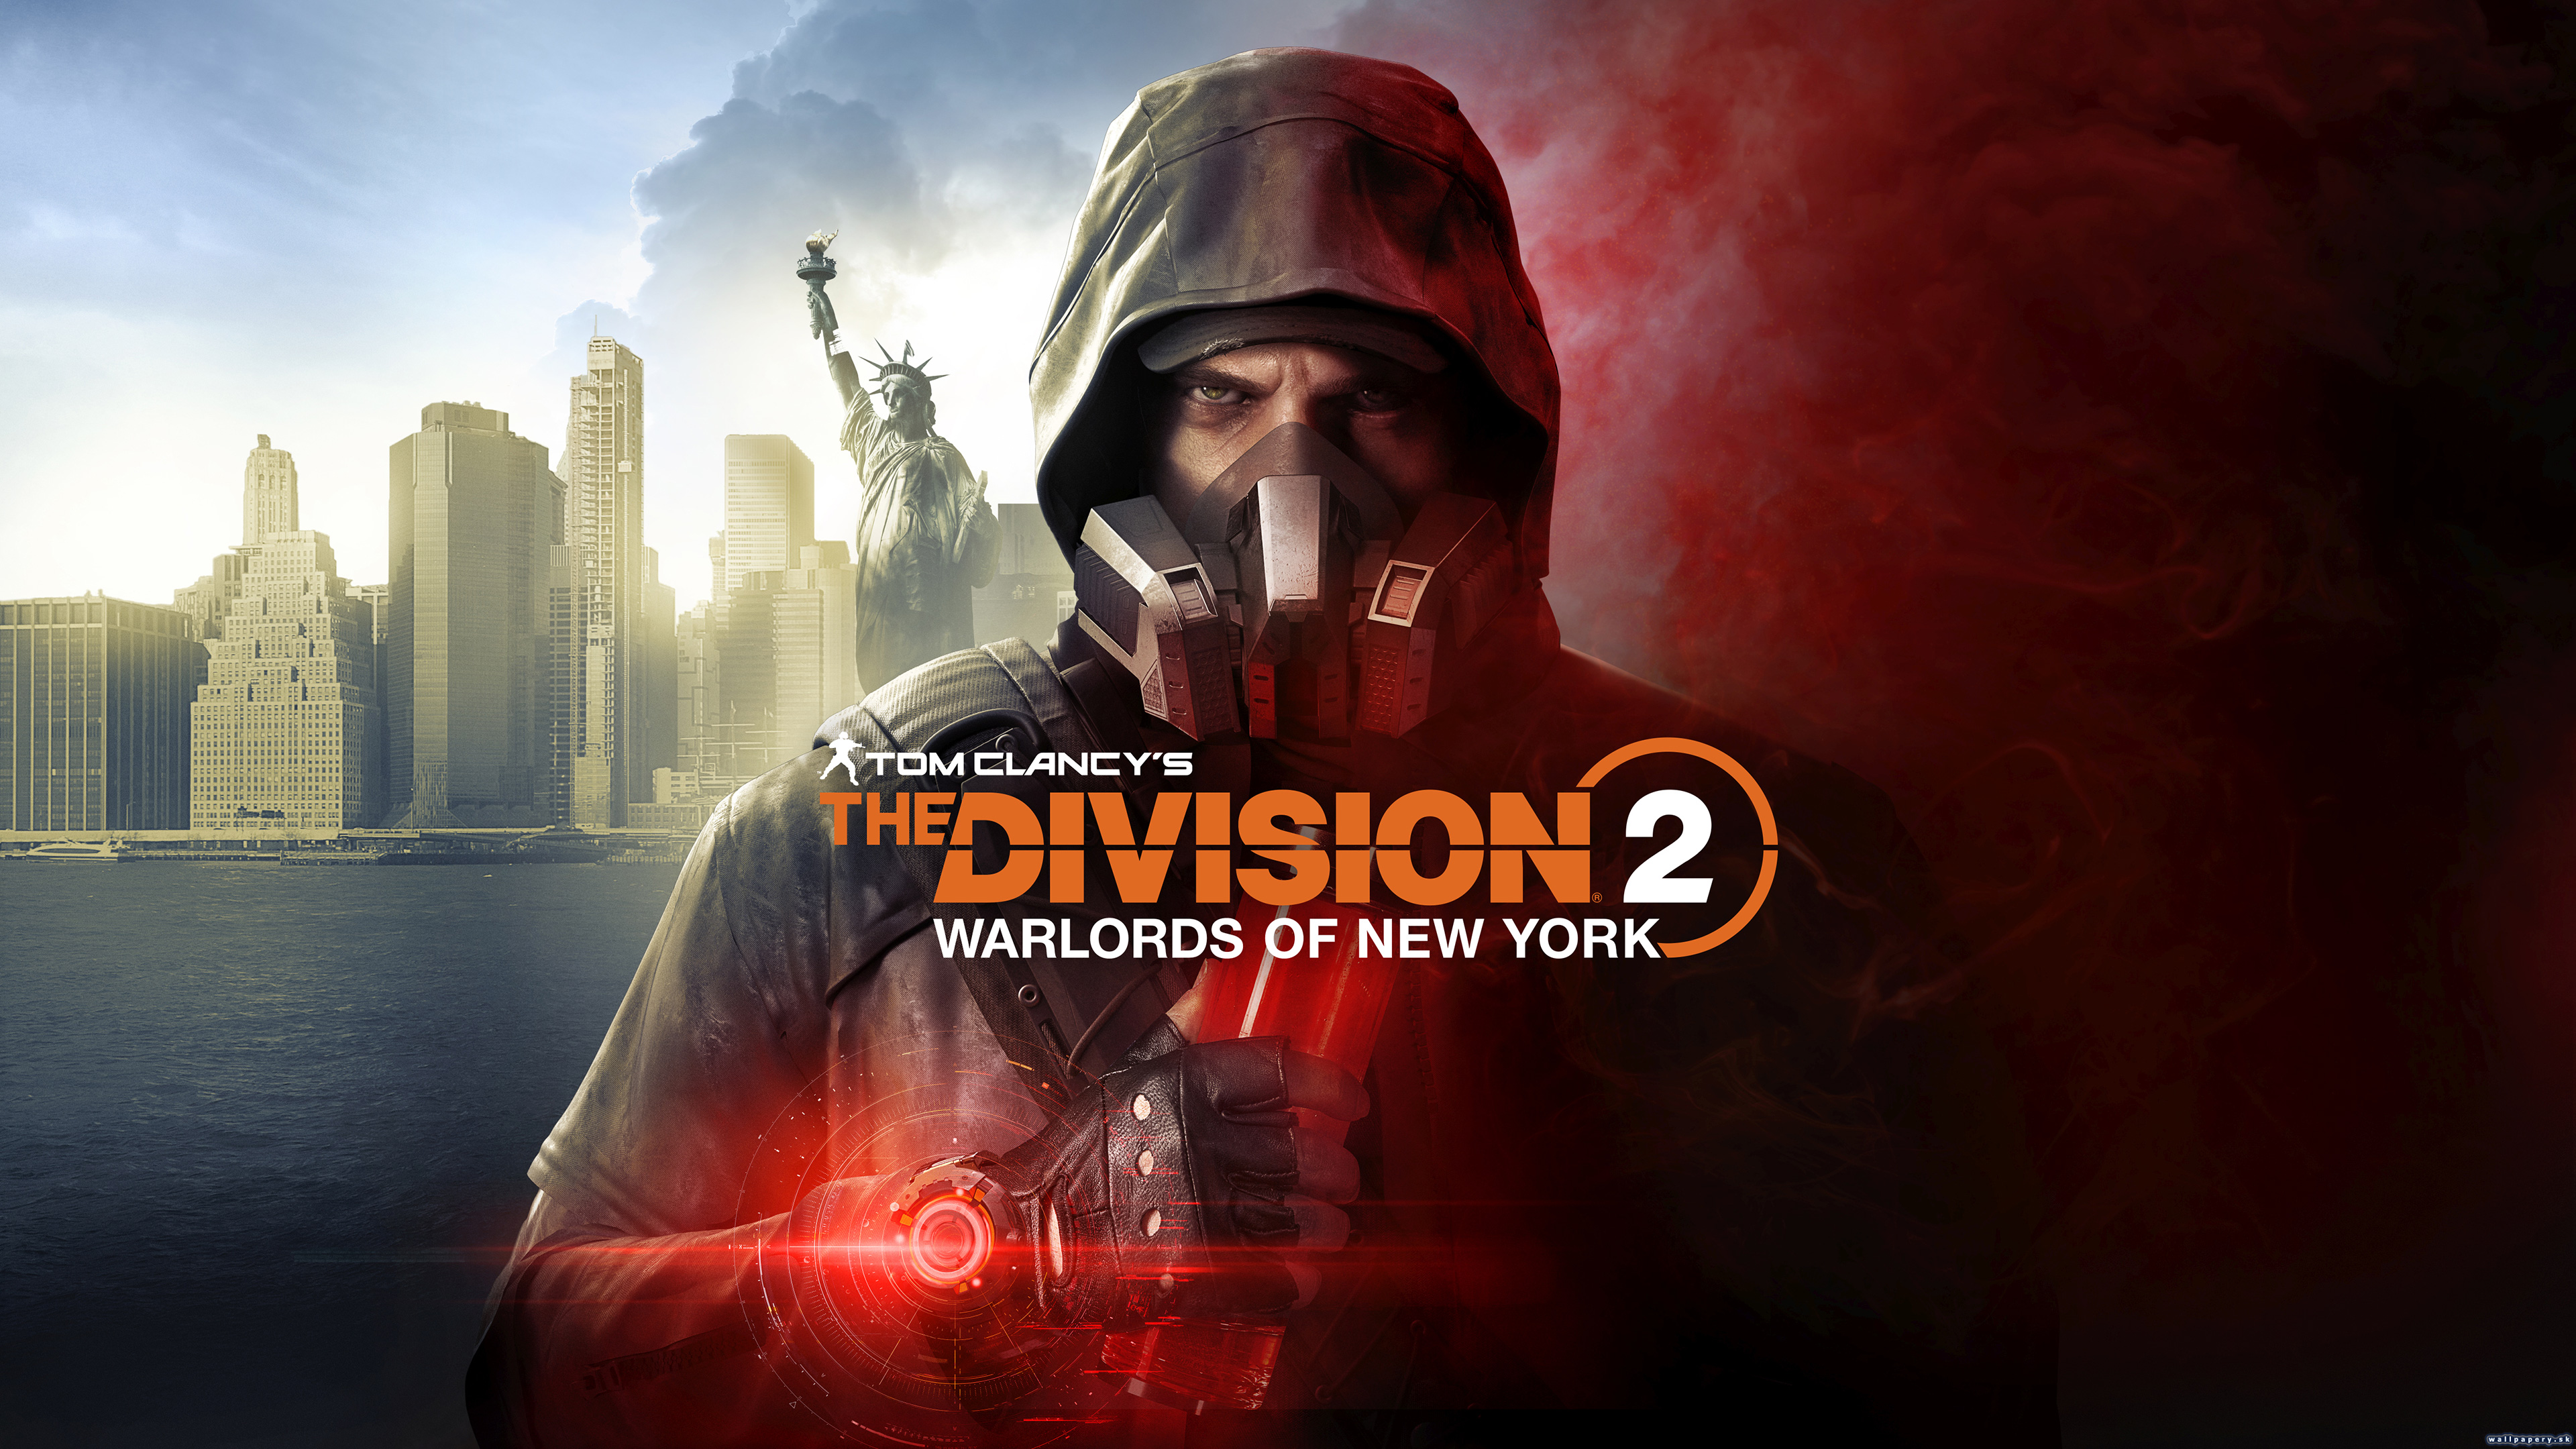 The Division 2: Warlords of New York - wallpaper 1